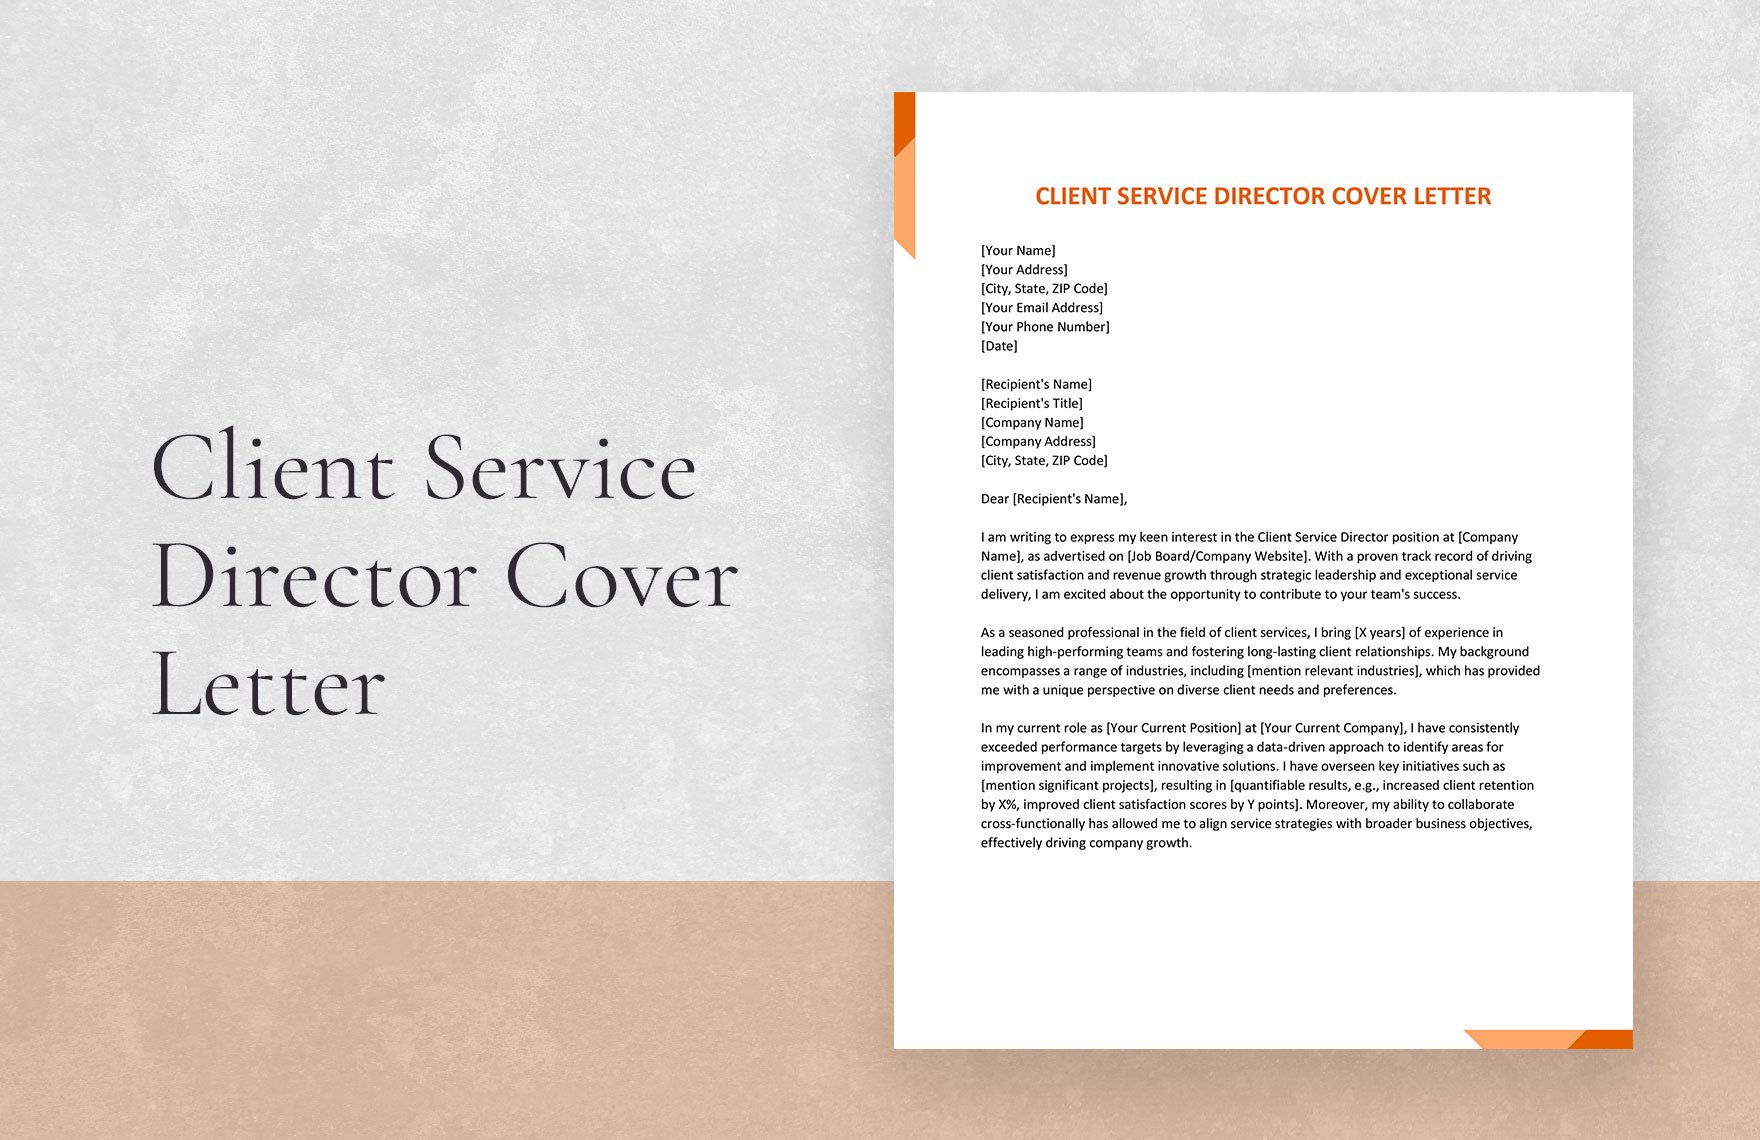 Client Service Director Cover Letter